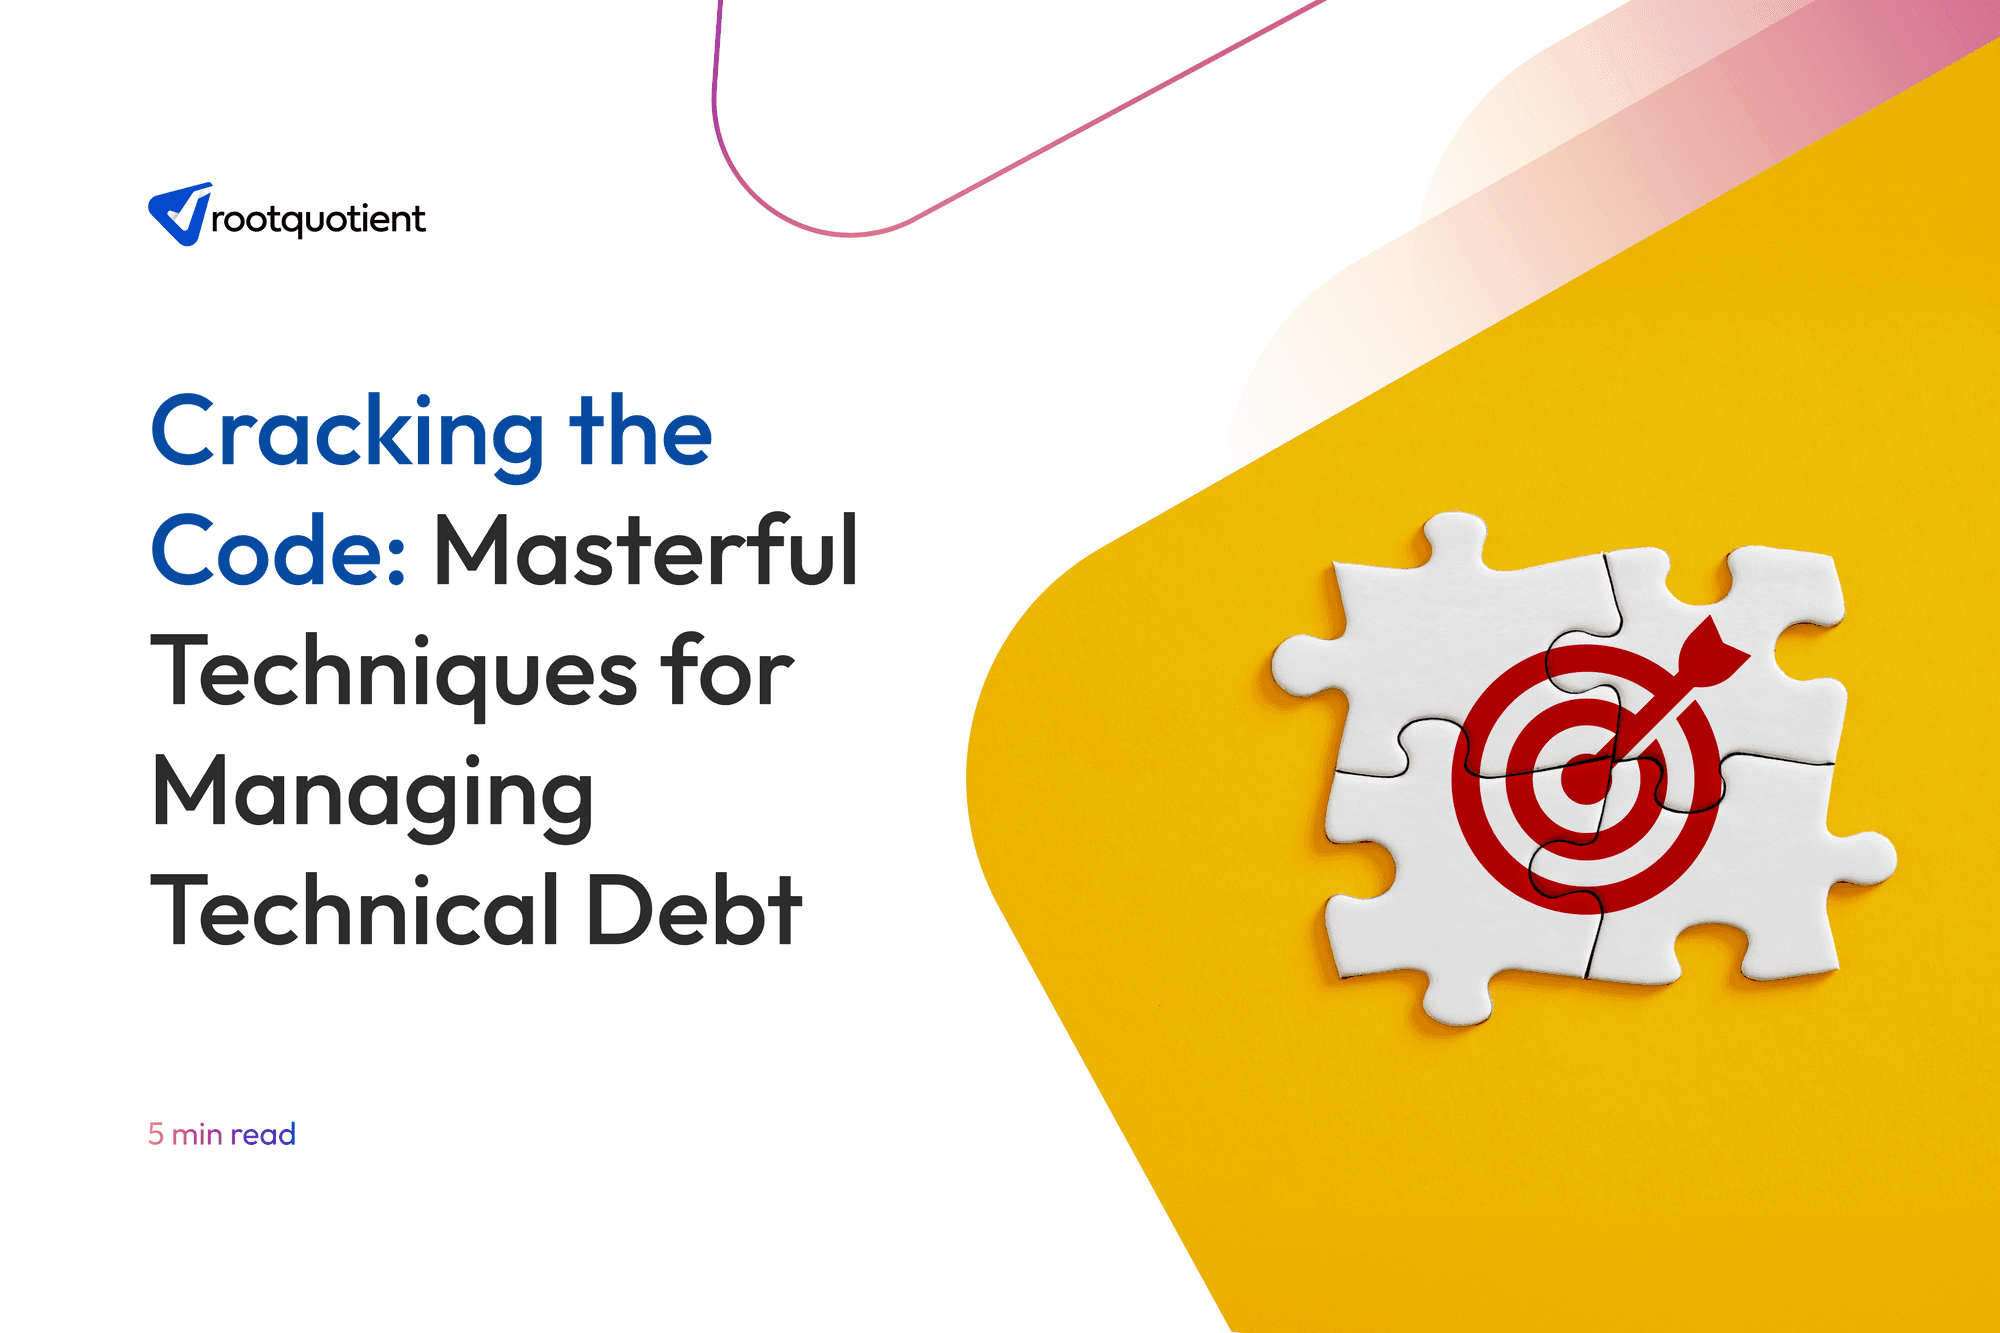 Cracking the Code: Masterful Techniques for Managing Technical Debt